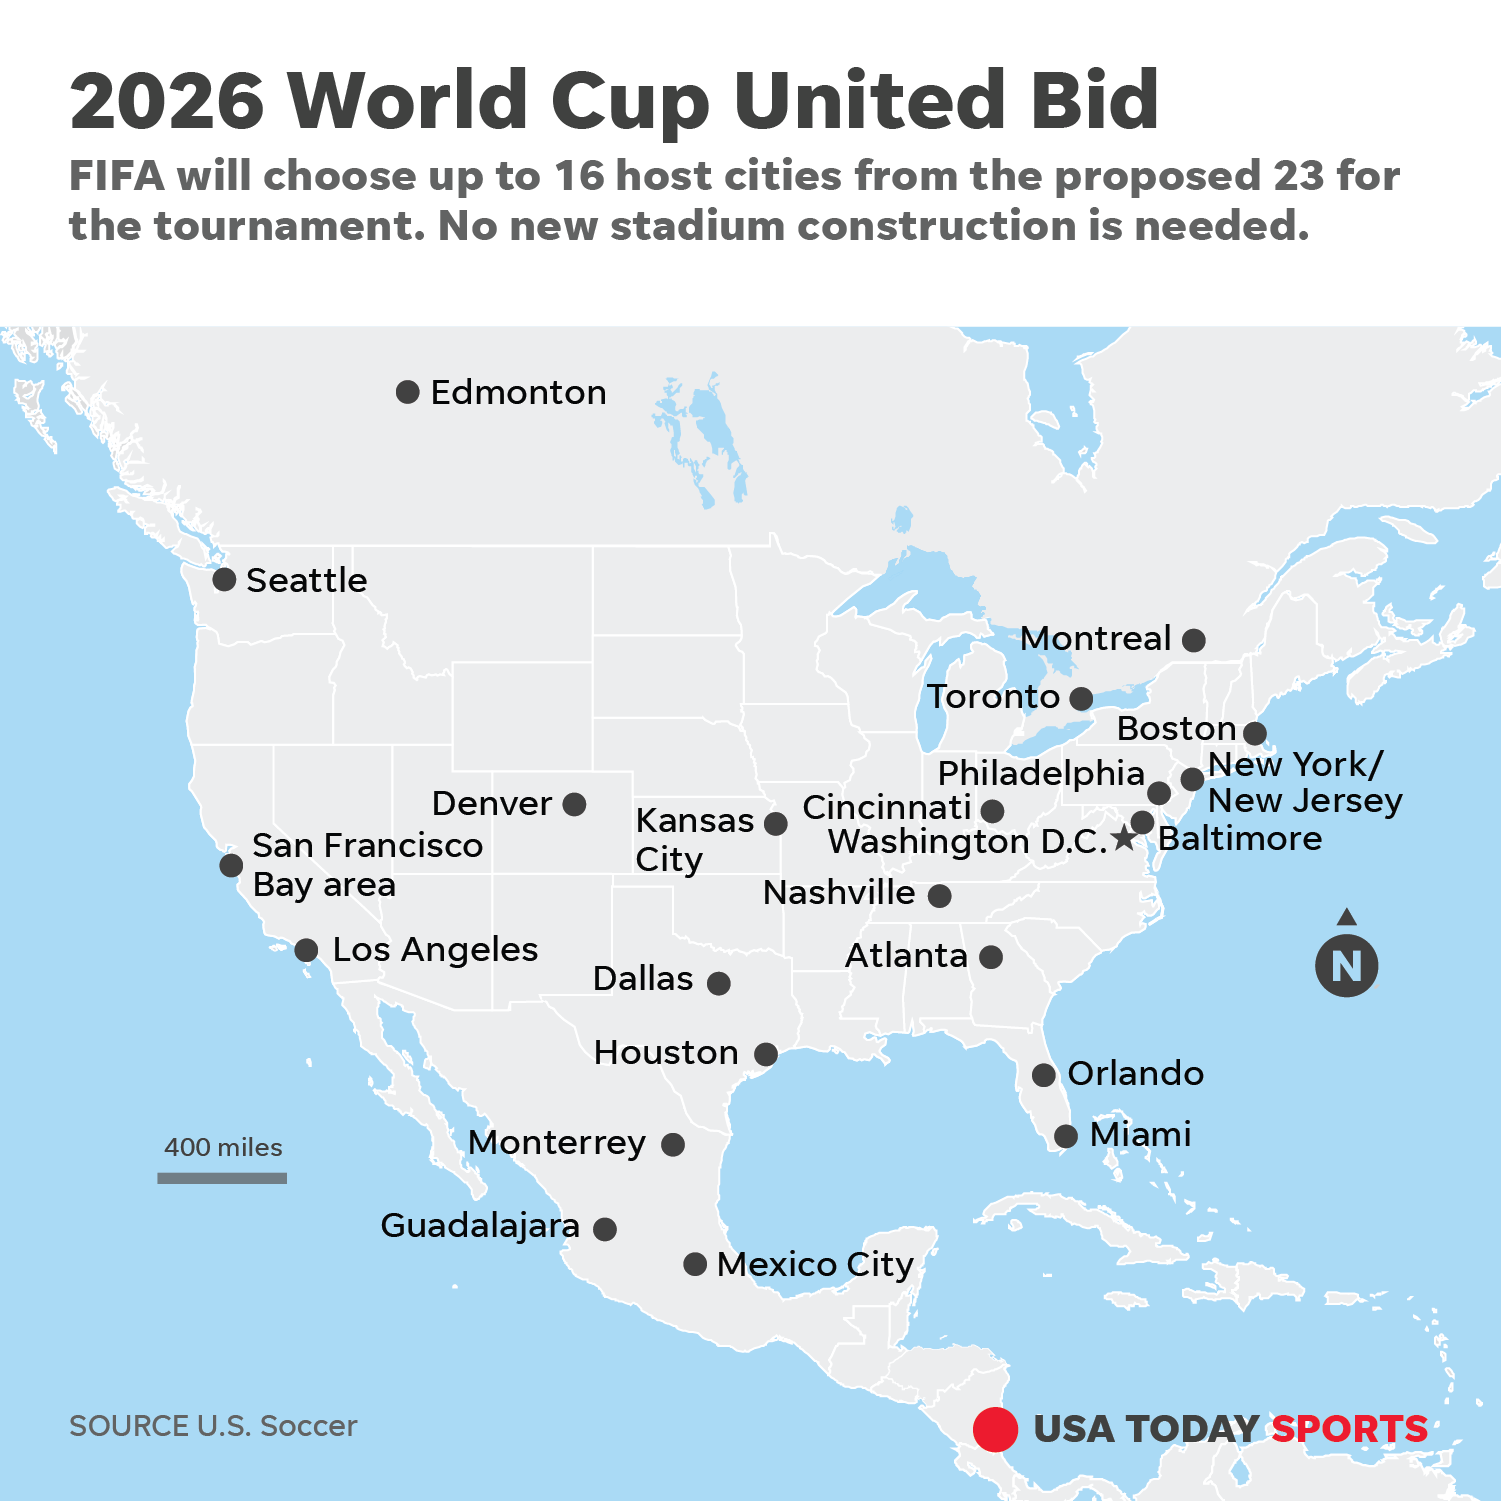 World Cup 2026: How Each Country Voted - The New York Times